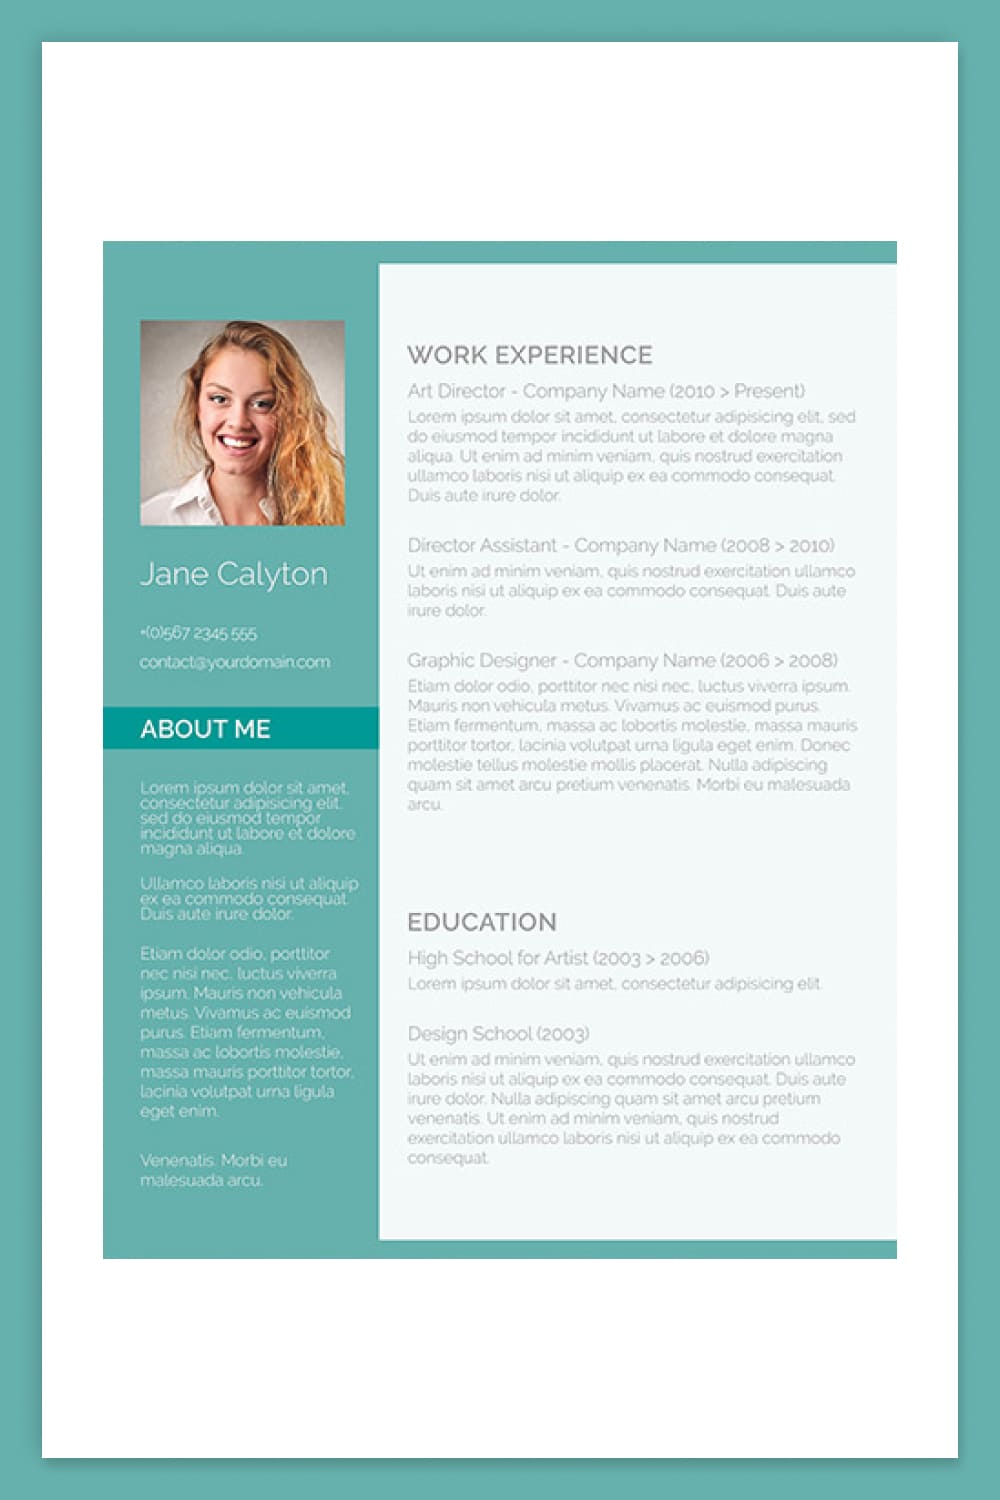 Resume with green and gray column and photo.